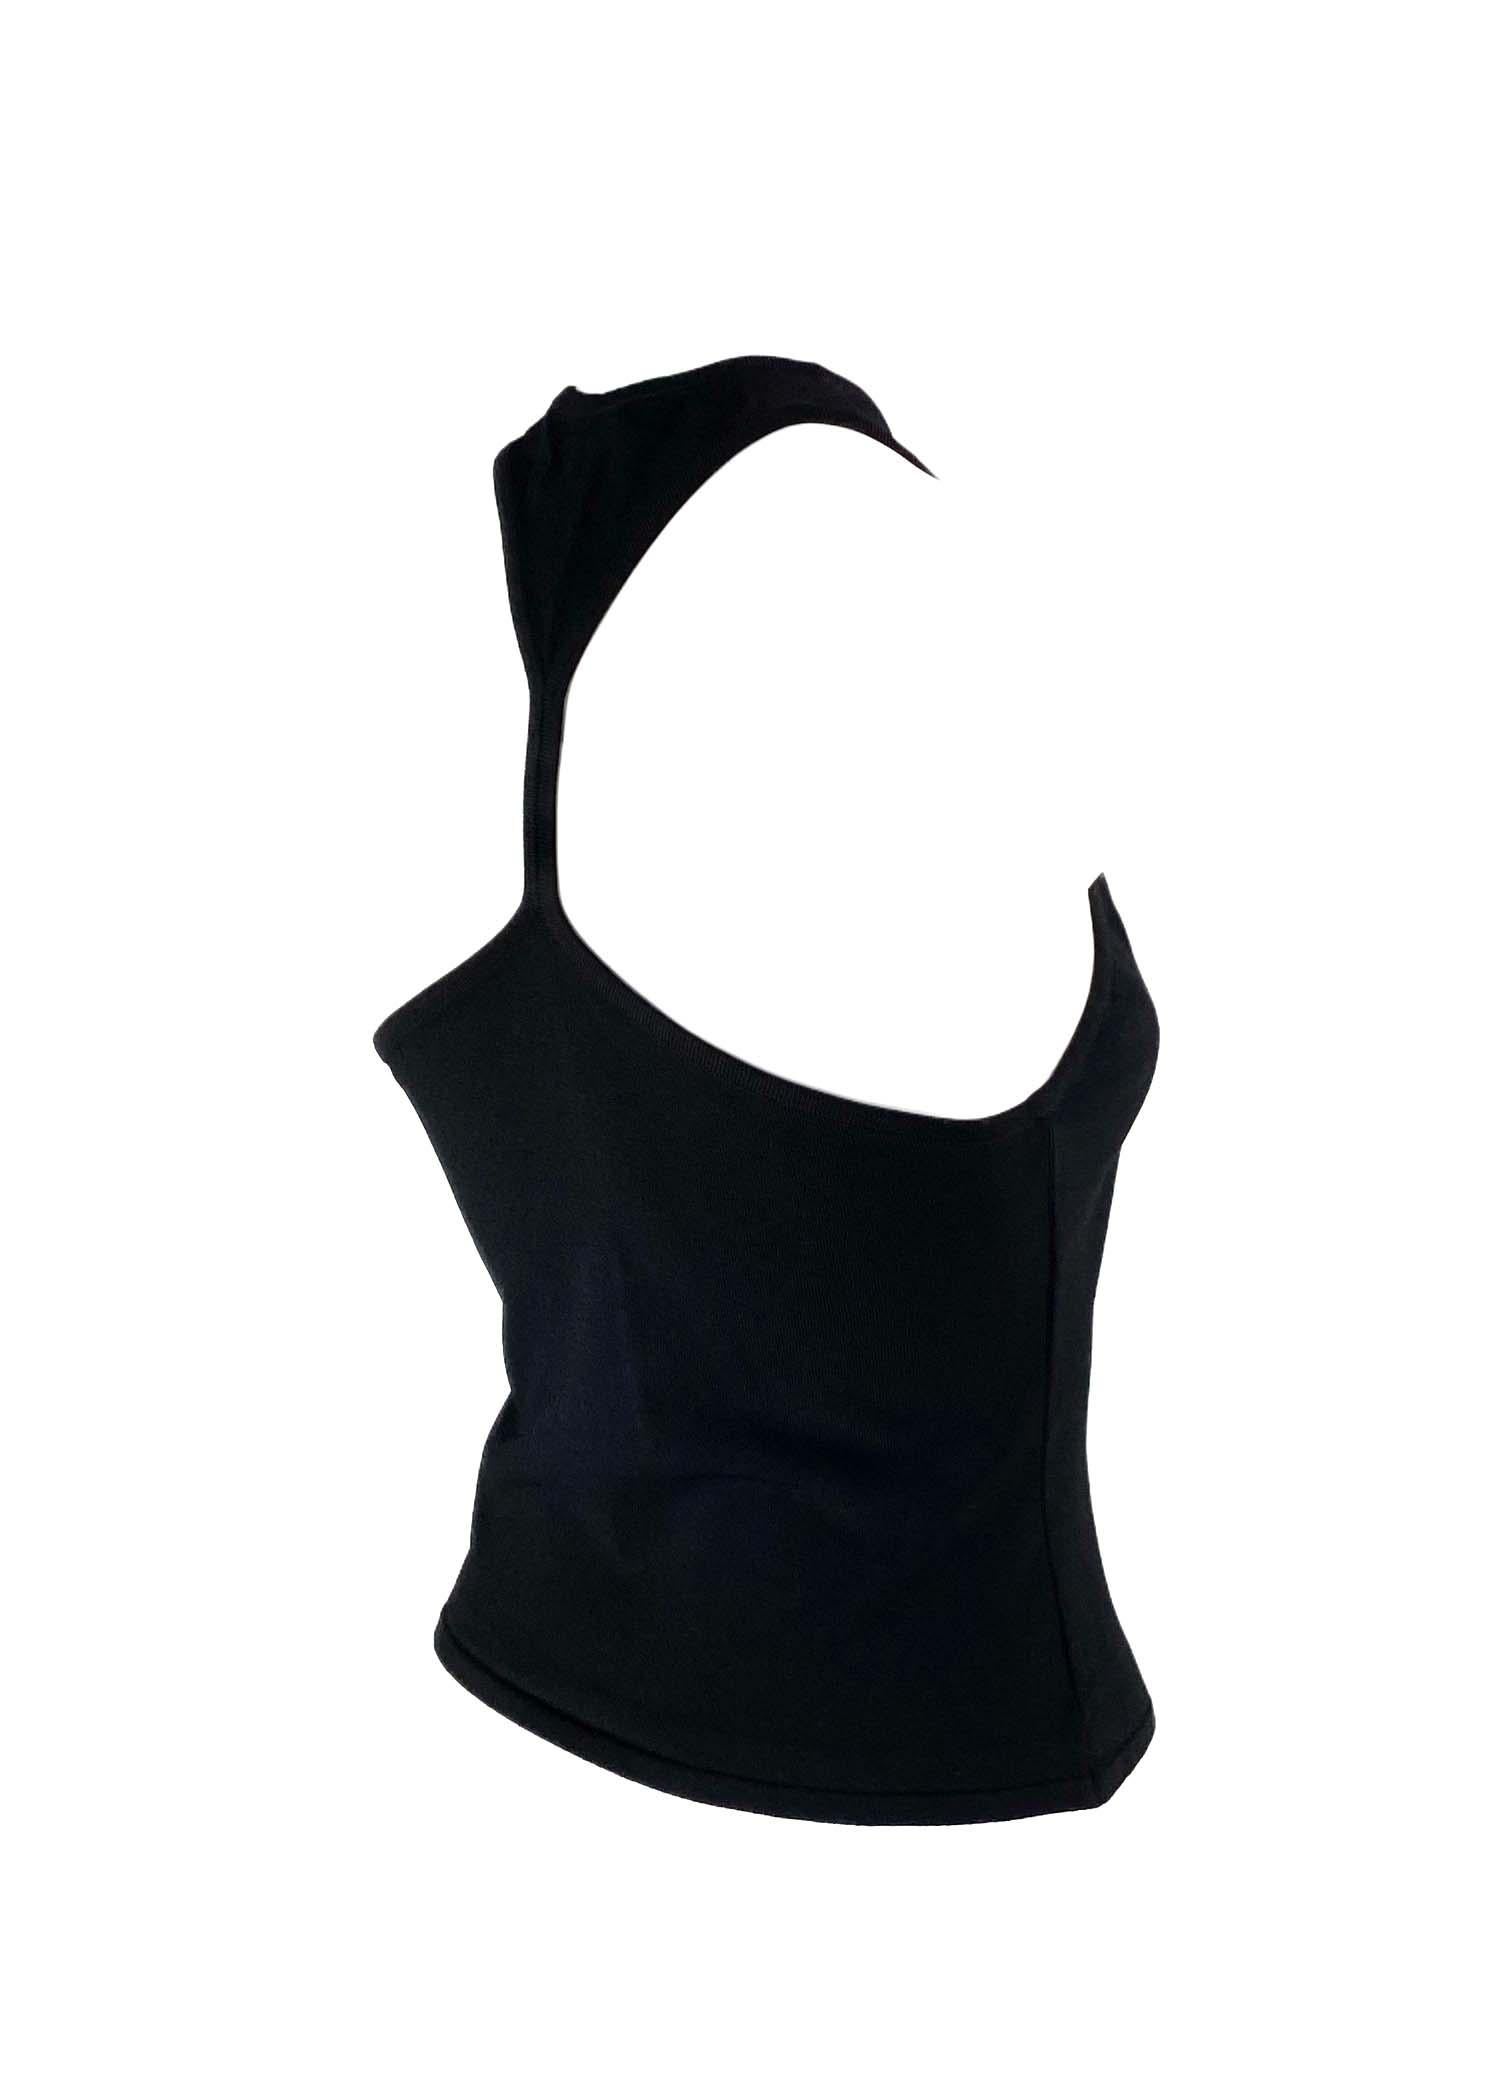 Women's S/S 1998 Gucci by Tom Ford Black Knit Racerback Tank 